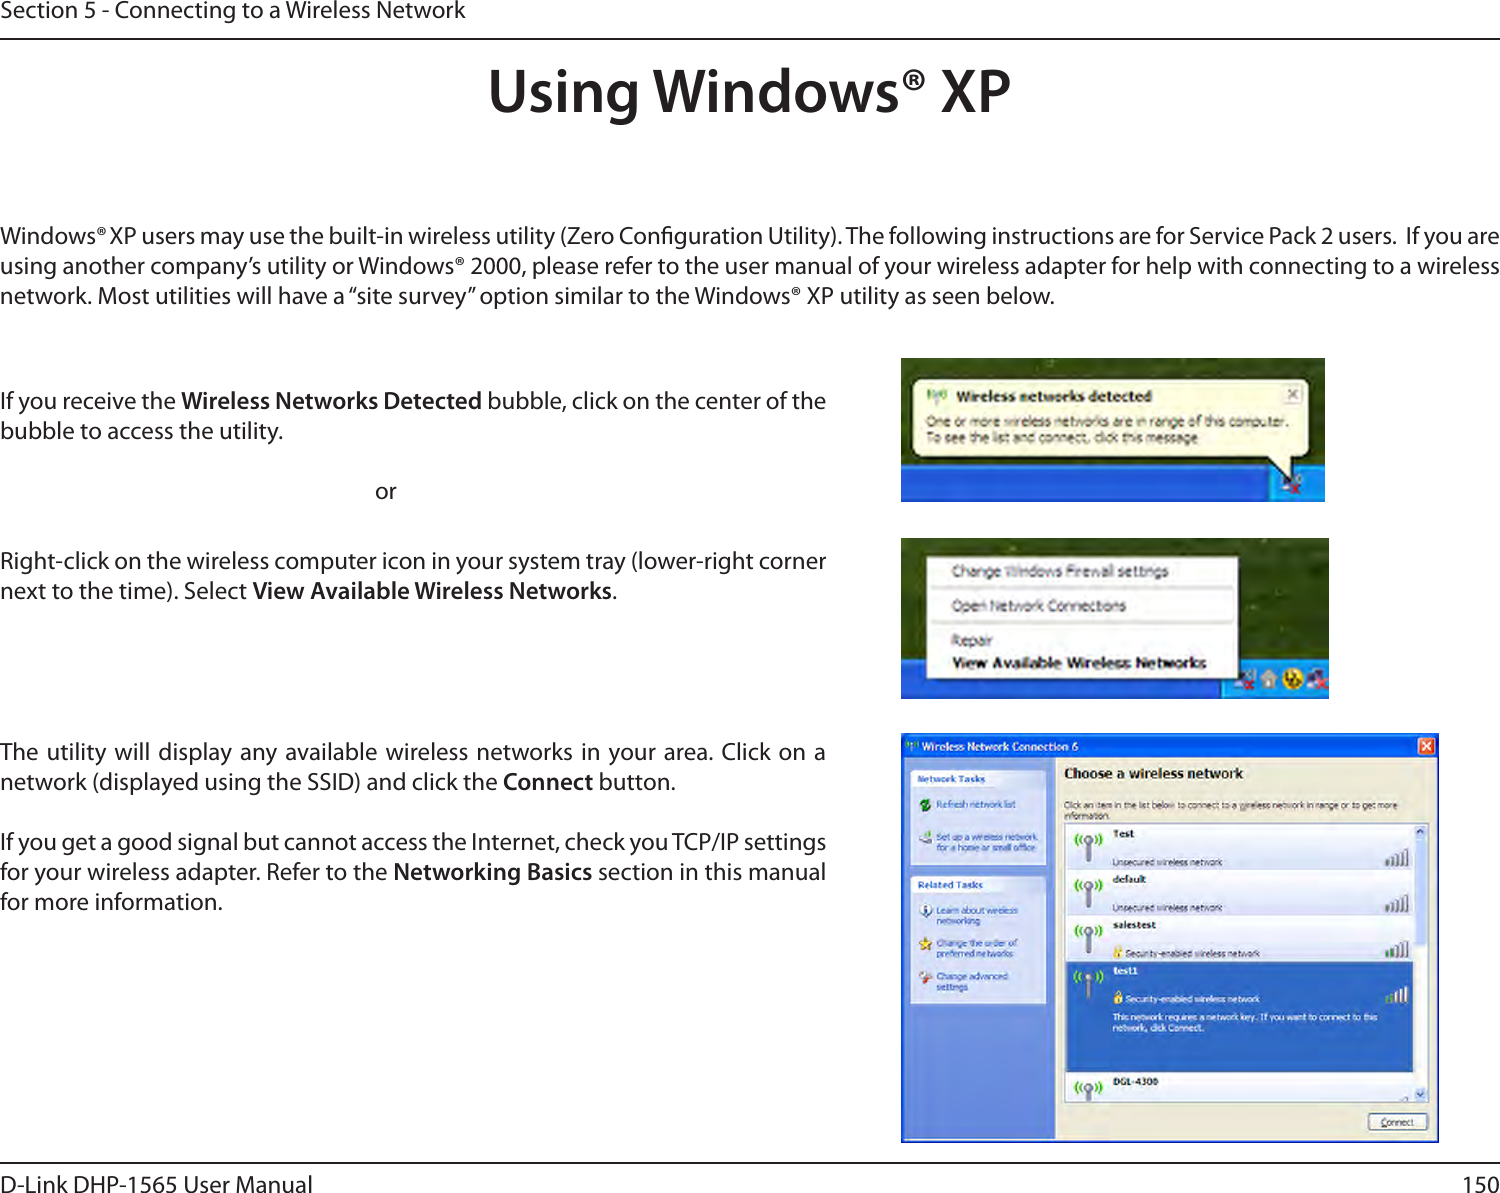 150D-Link DHP-1565 User ManualSection 5 - Connecting to a Wireless NetworkUsing Windows® XPWindows® XP users may use the built-in wireless utility (Zero Conguration Utility). The following instructions are for Service Pack 2 users.  If you are using another company’s utility or Windows® 2000, please refer to the user manual of your wireless adapter for help with connecting to a wireless network. Most utilities will have a “site survey” option similar to the Windows® XP utility as seen below.Right-click on the wireless computer icon in your system tray (lower-right corner next to the time). Select View Available Wireless Networks.If you receive the Wireless Networks Detected bubble, click on the center of the bubble to access the utility.     orThe utility will display any available wireless networks in your area. Click on a network (displayed using the SSID) and click the Connect button.If you get a good signal but cannot access the Internet, check you TCP/IP settings for your wireless adapter. Refer to the Networking Basics section in this manual for more information.